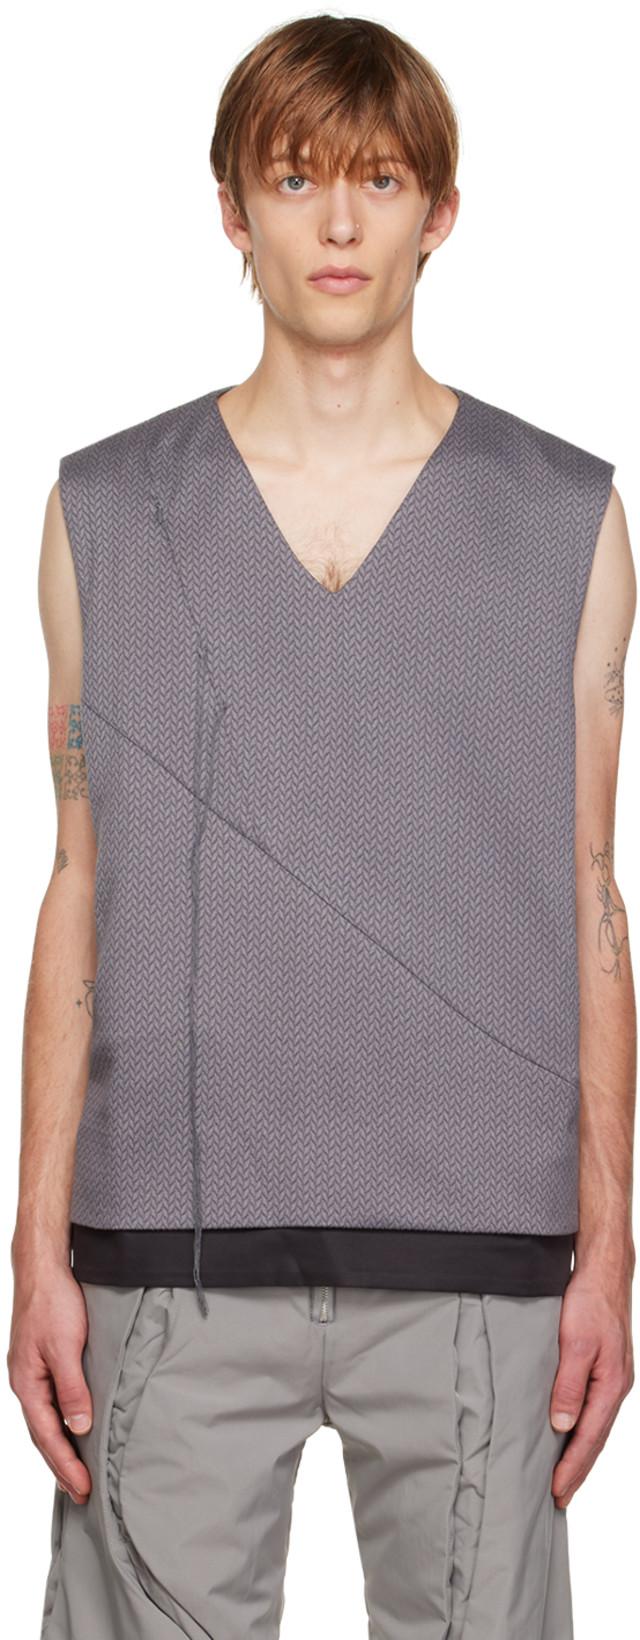 Gray 'Asynmetrical But Symmetrical' Vest by AENRMOUS